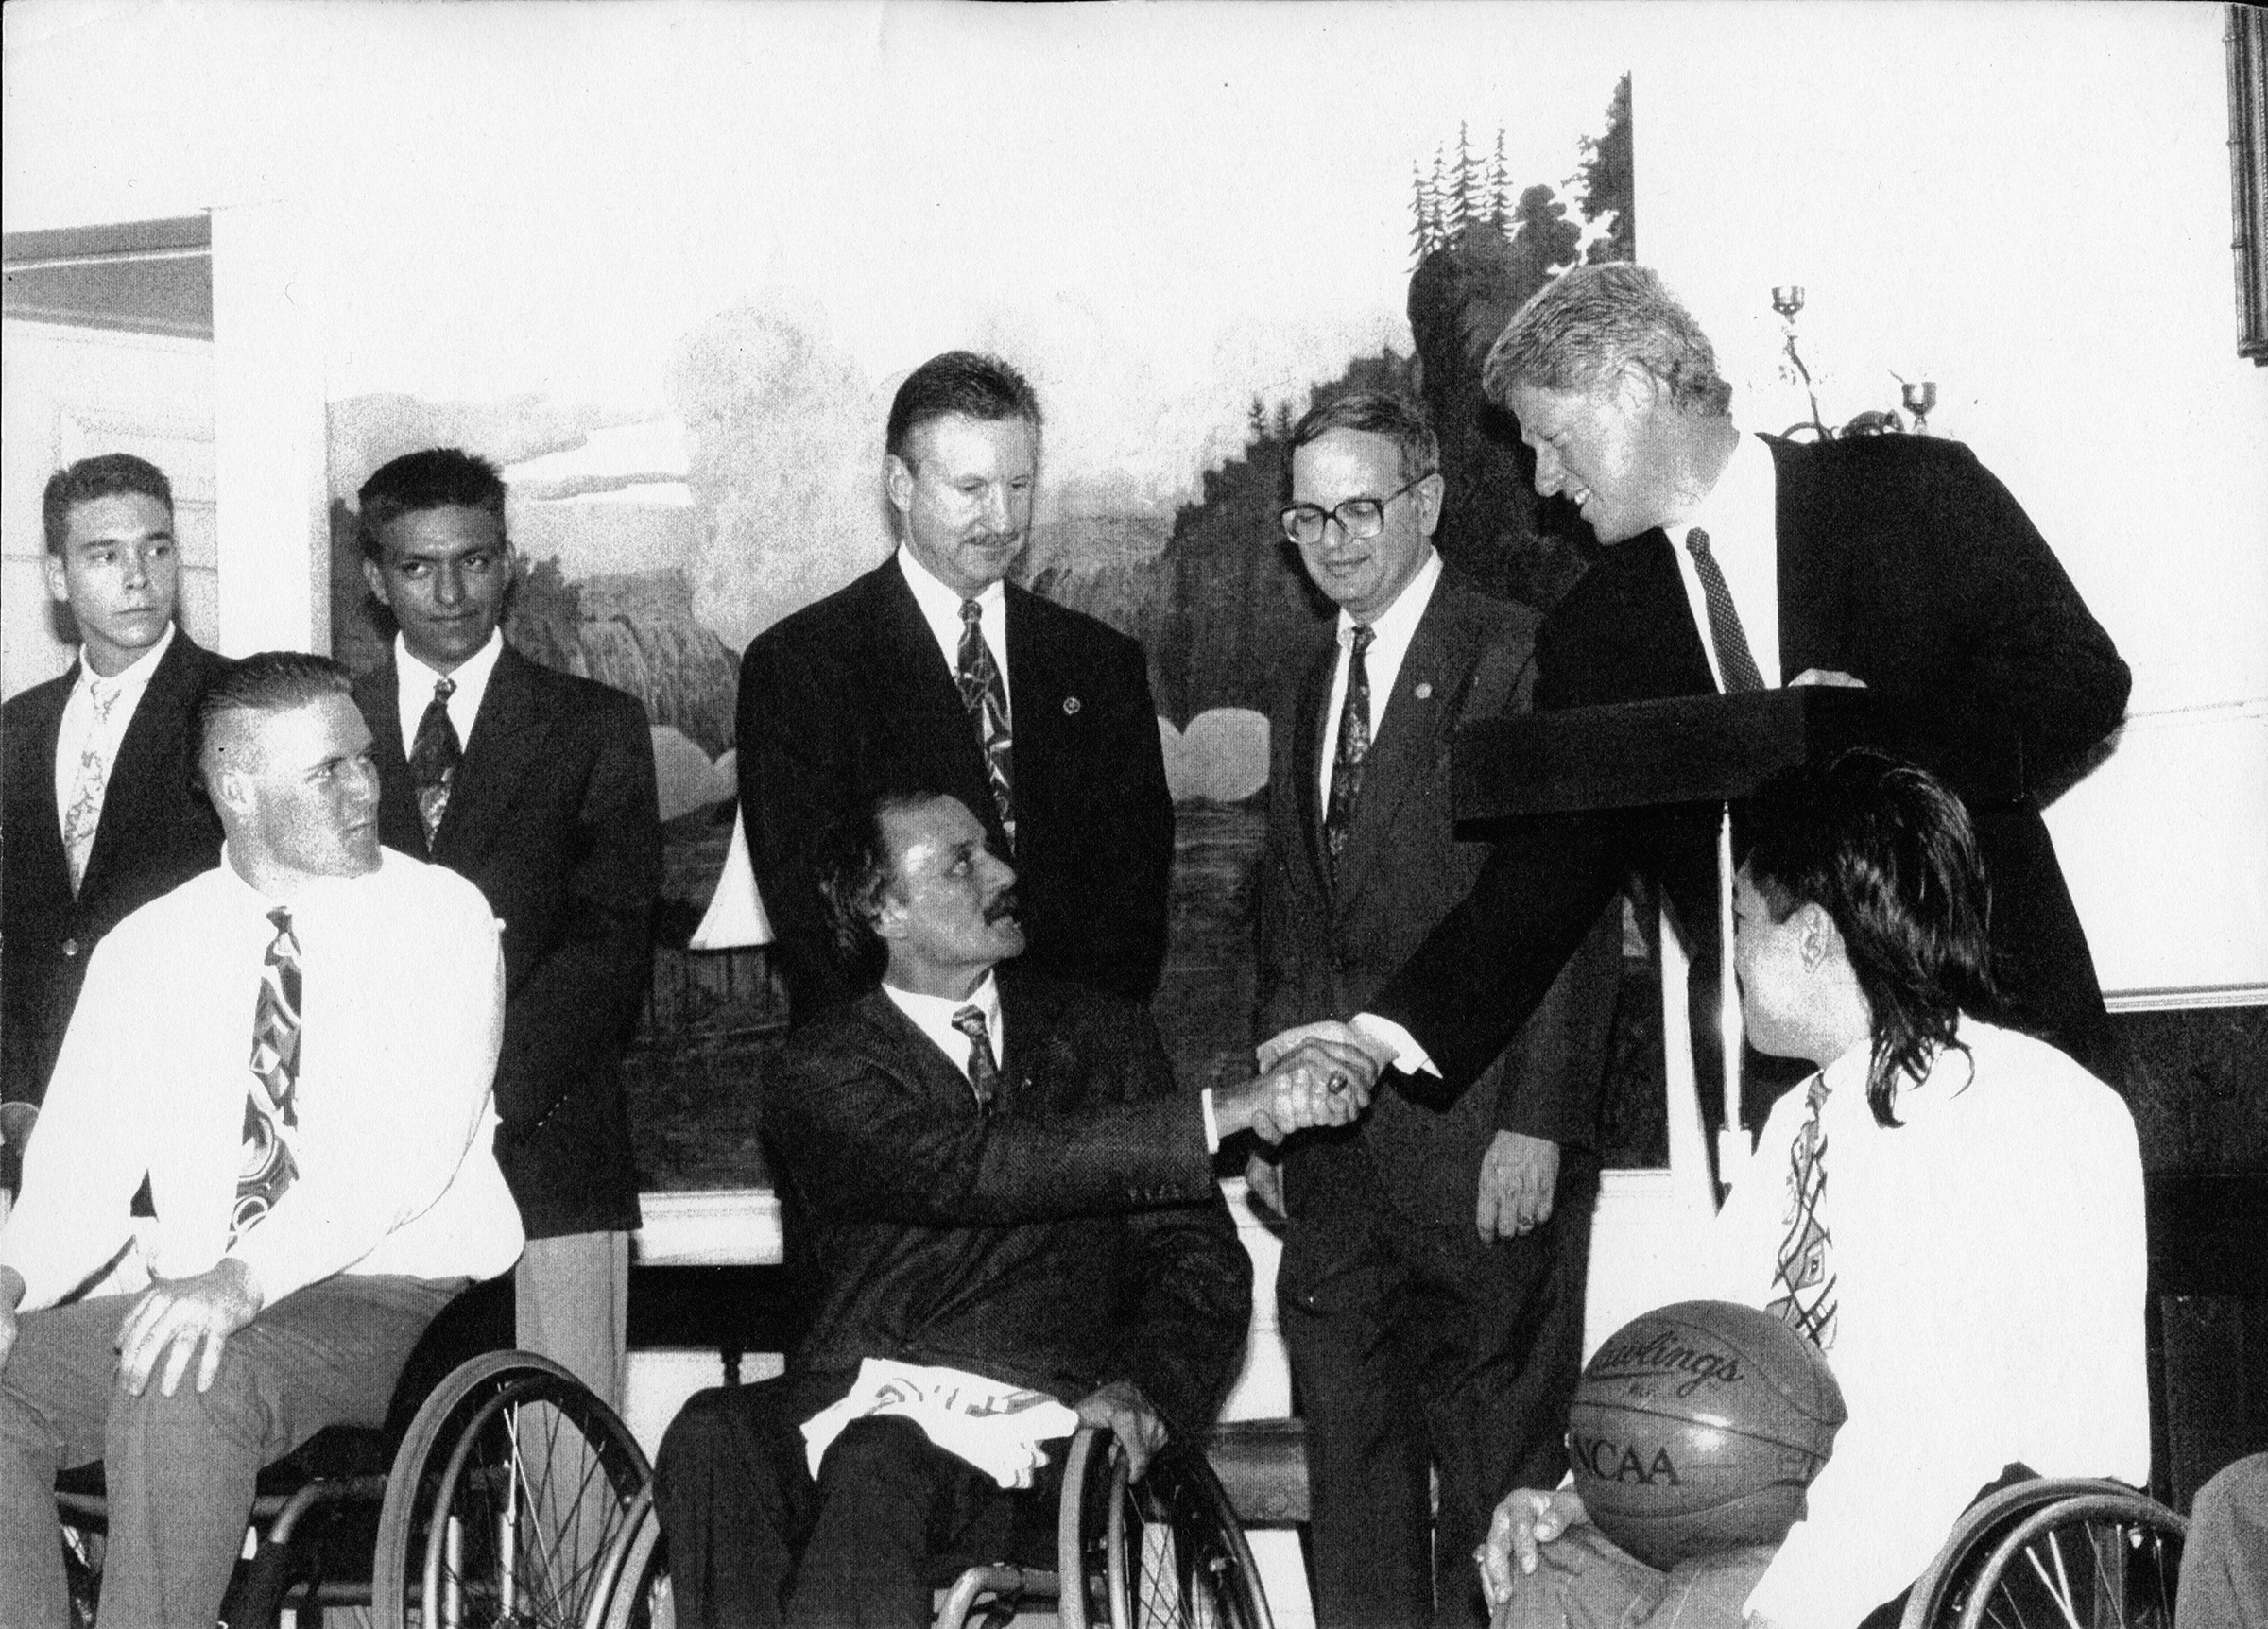 Black and white photo of the UTA Movin' Mavs wheelchair basketball team at the White House with President Bill Clinton shaking hands with coach Jim Hayes.